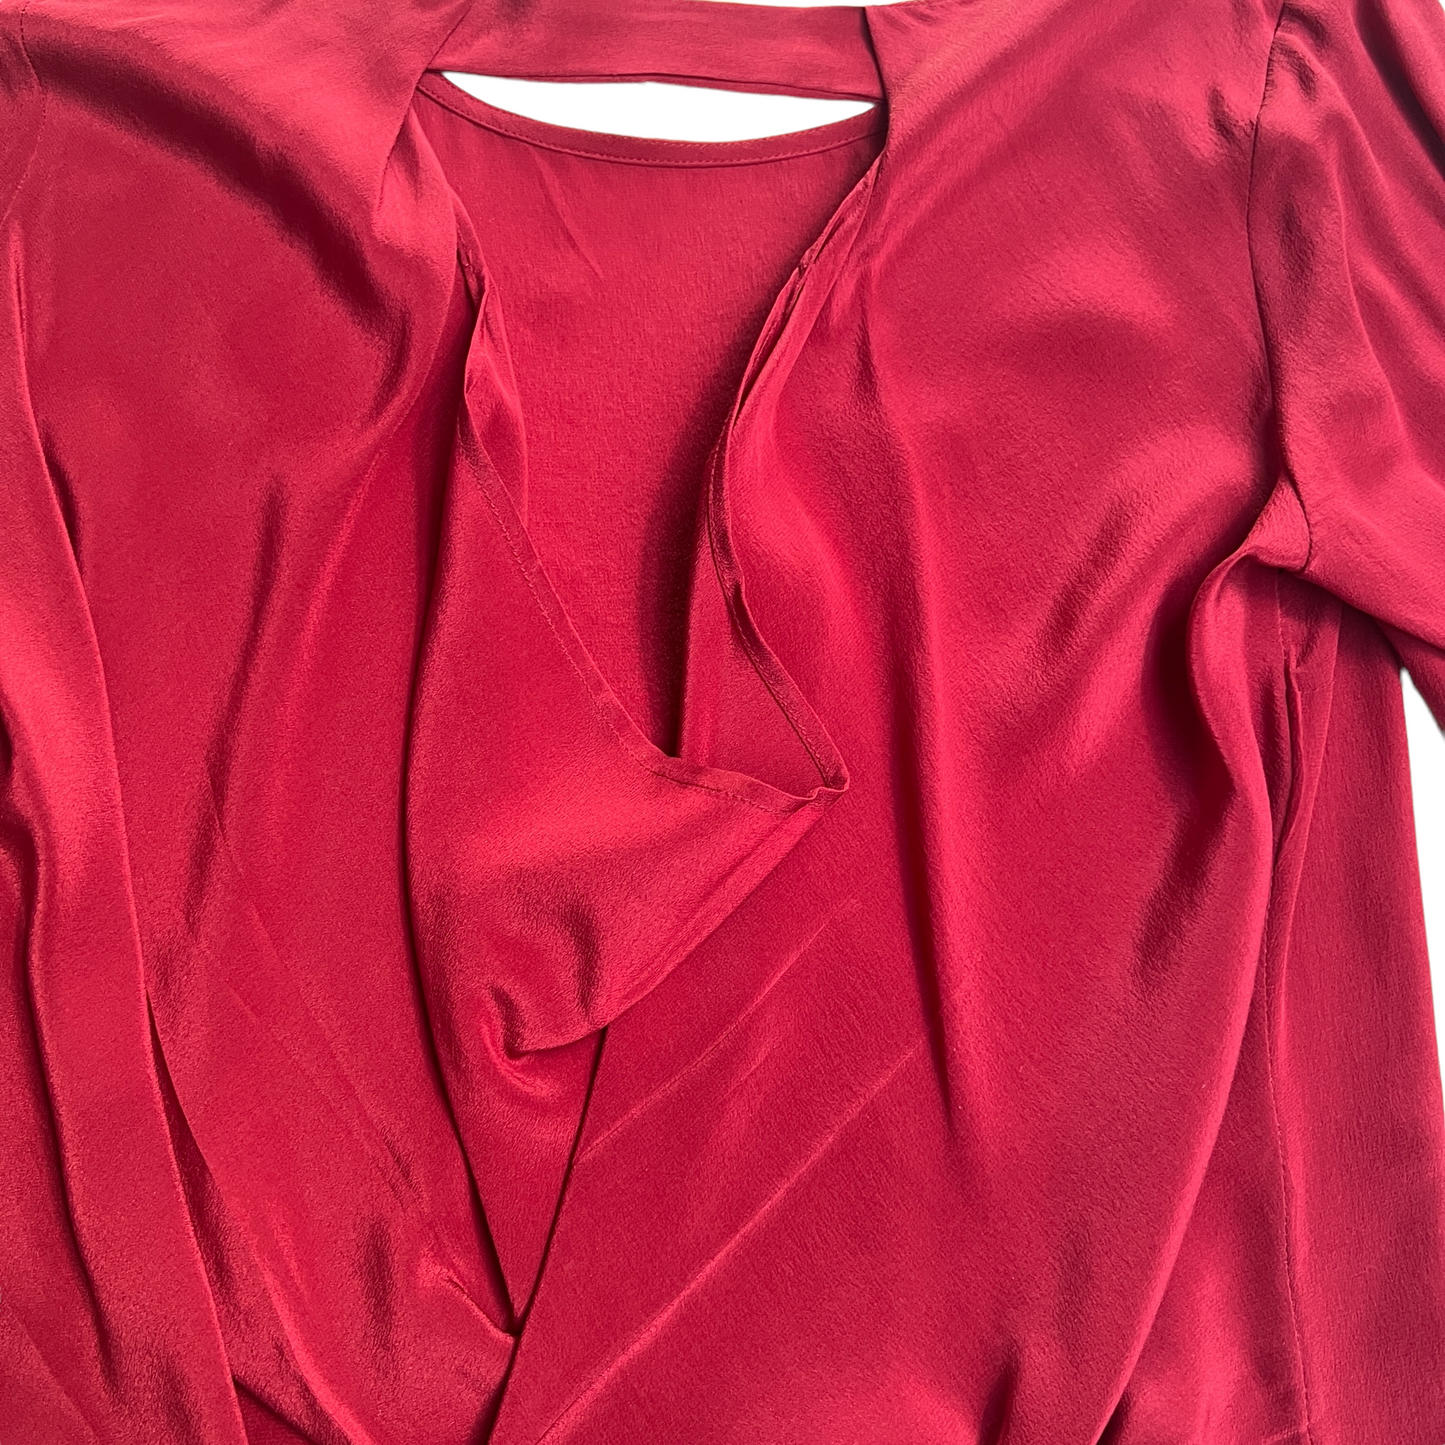 Red Silk Blouse - S